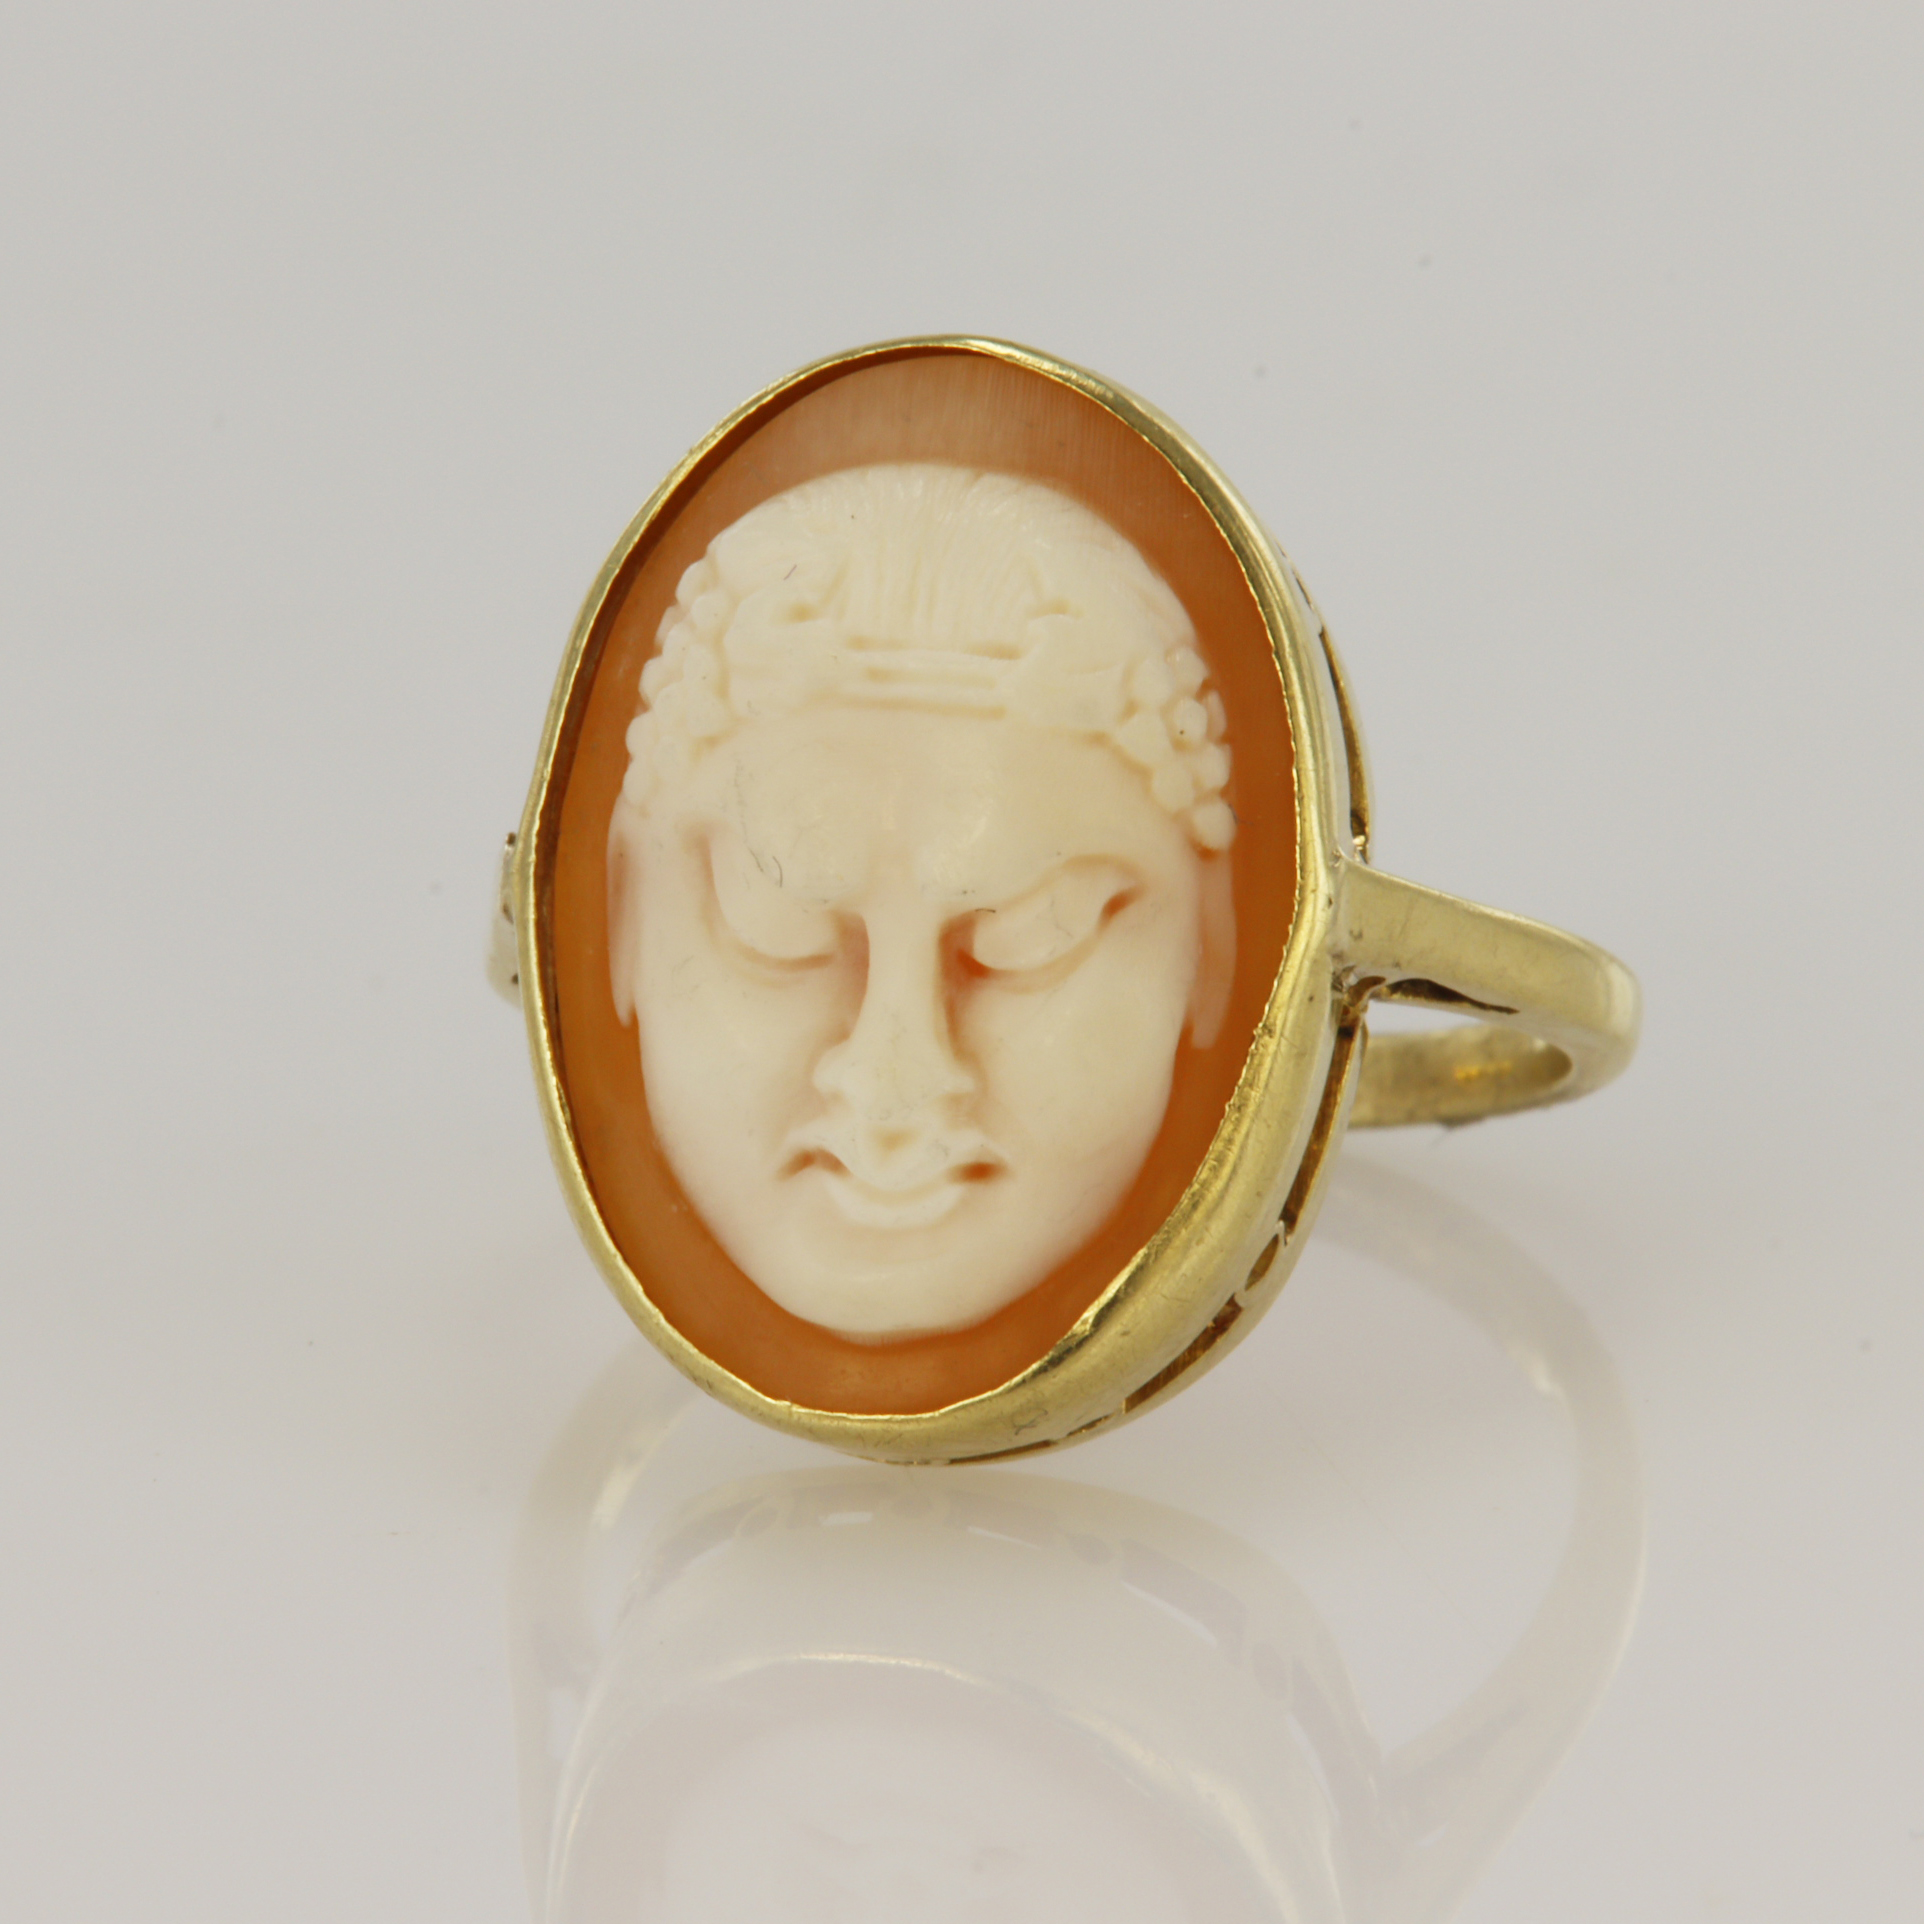 15ct yellow gold ring featuring an oval shell cameo measuring approx. 18mm x 13mm, depicting an